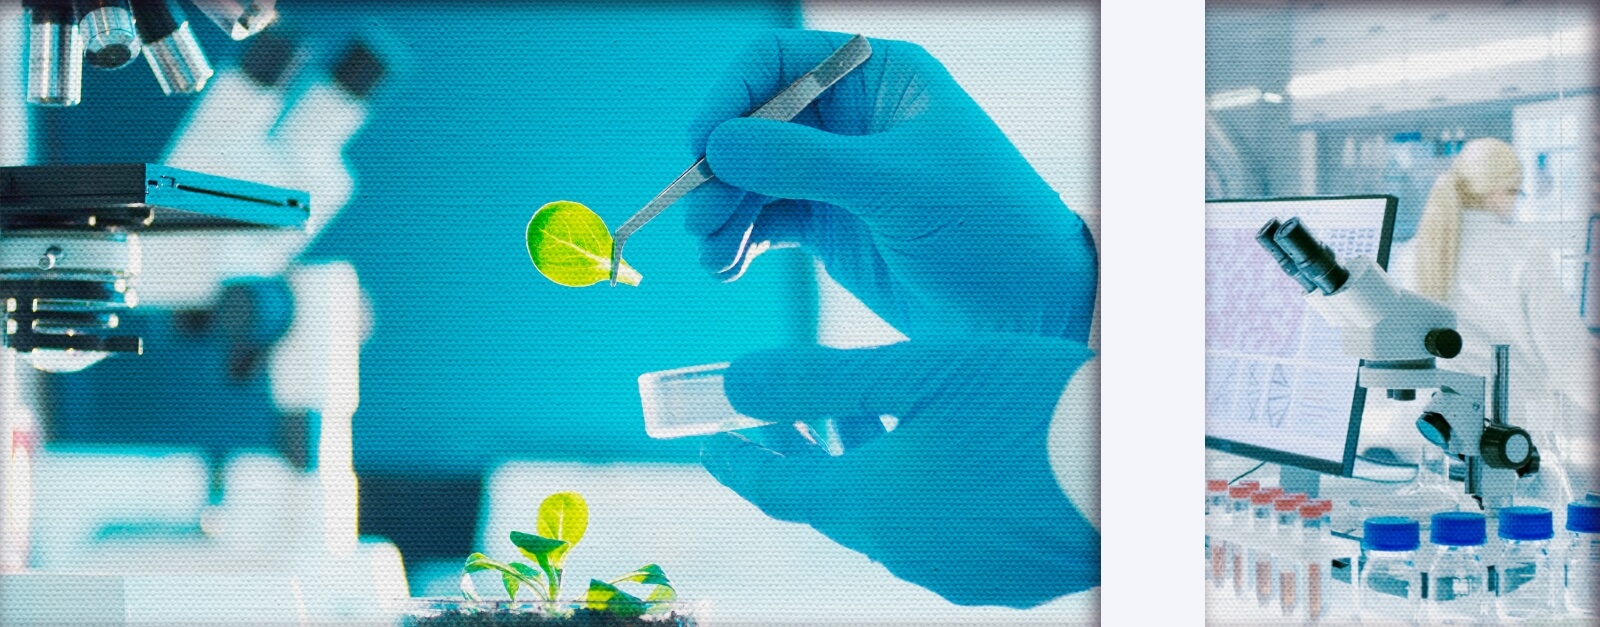 Plant sample and microscope in a lab